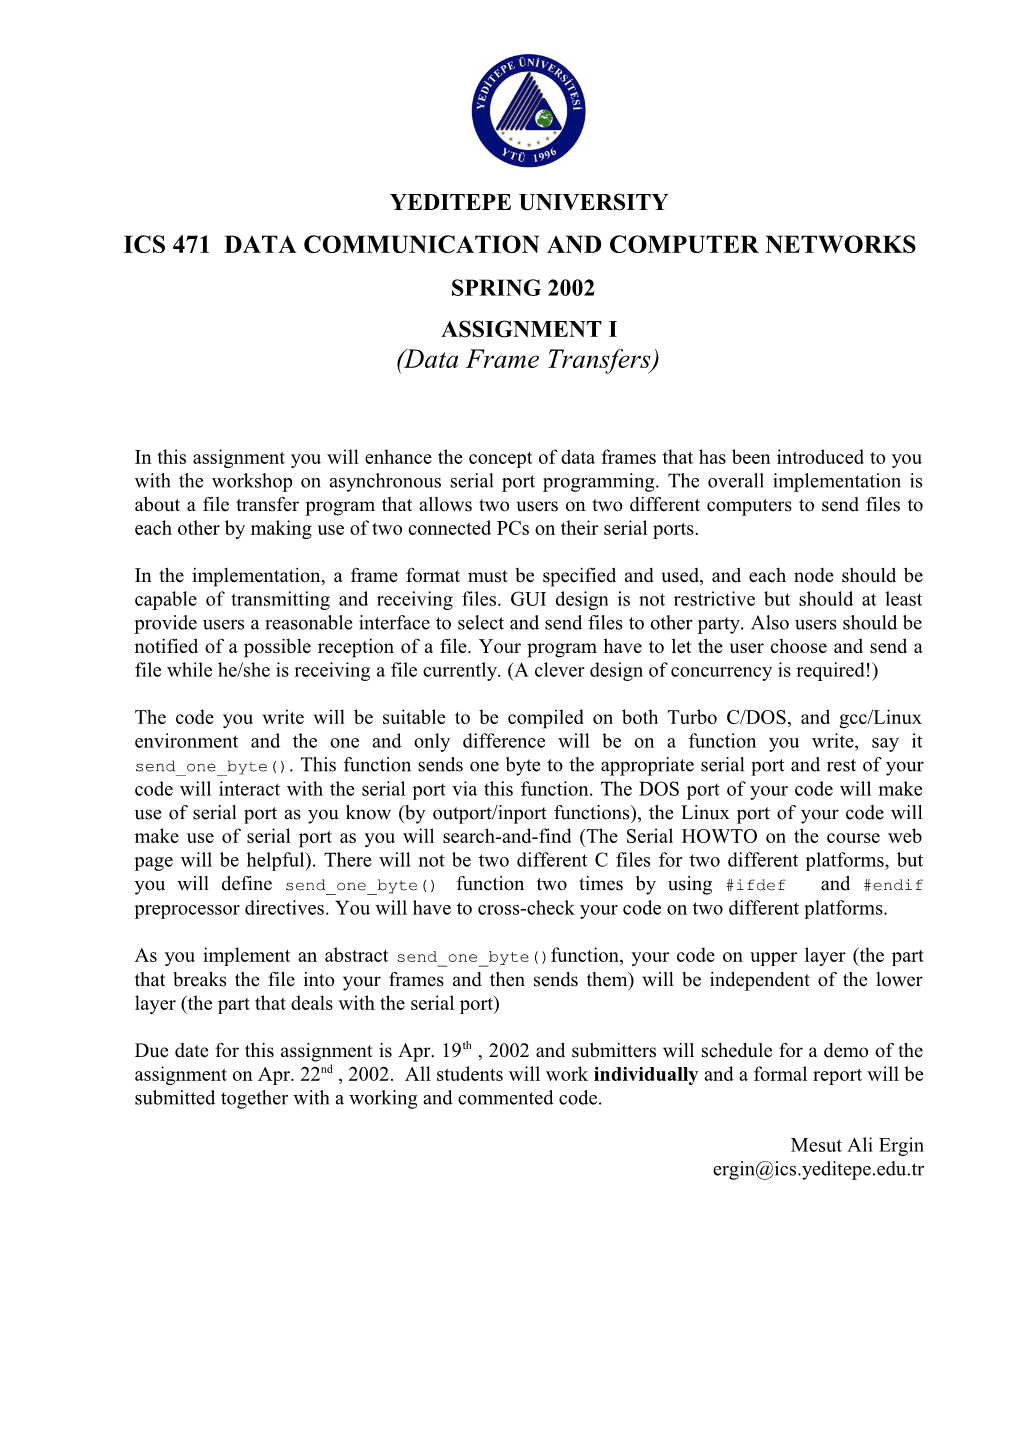 Ics 471 Data Communication and Computer Networks